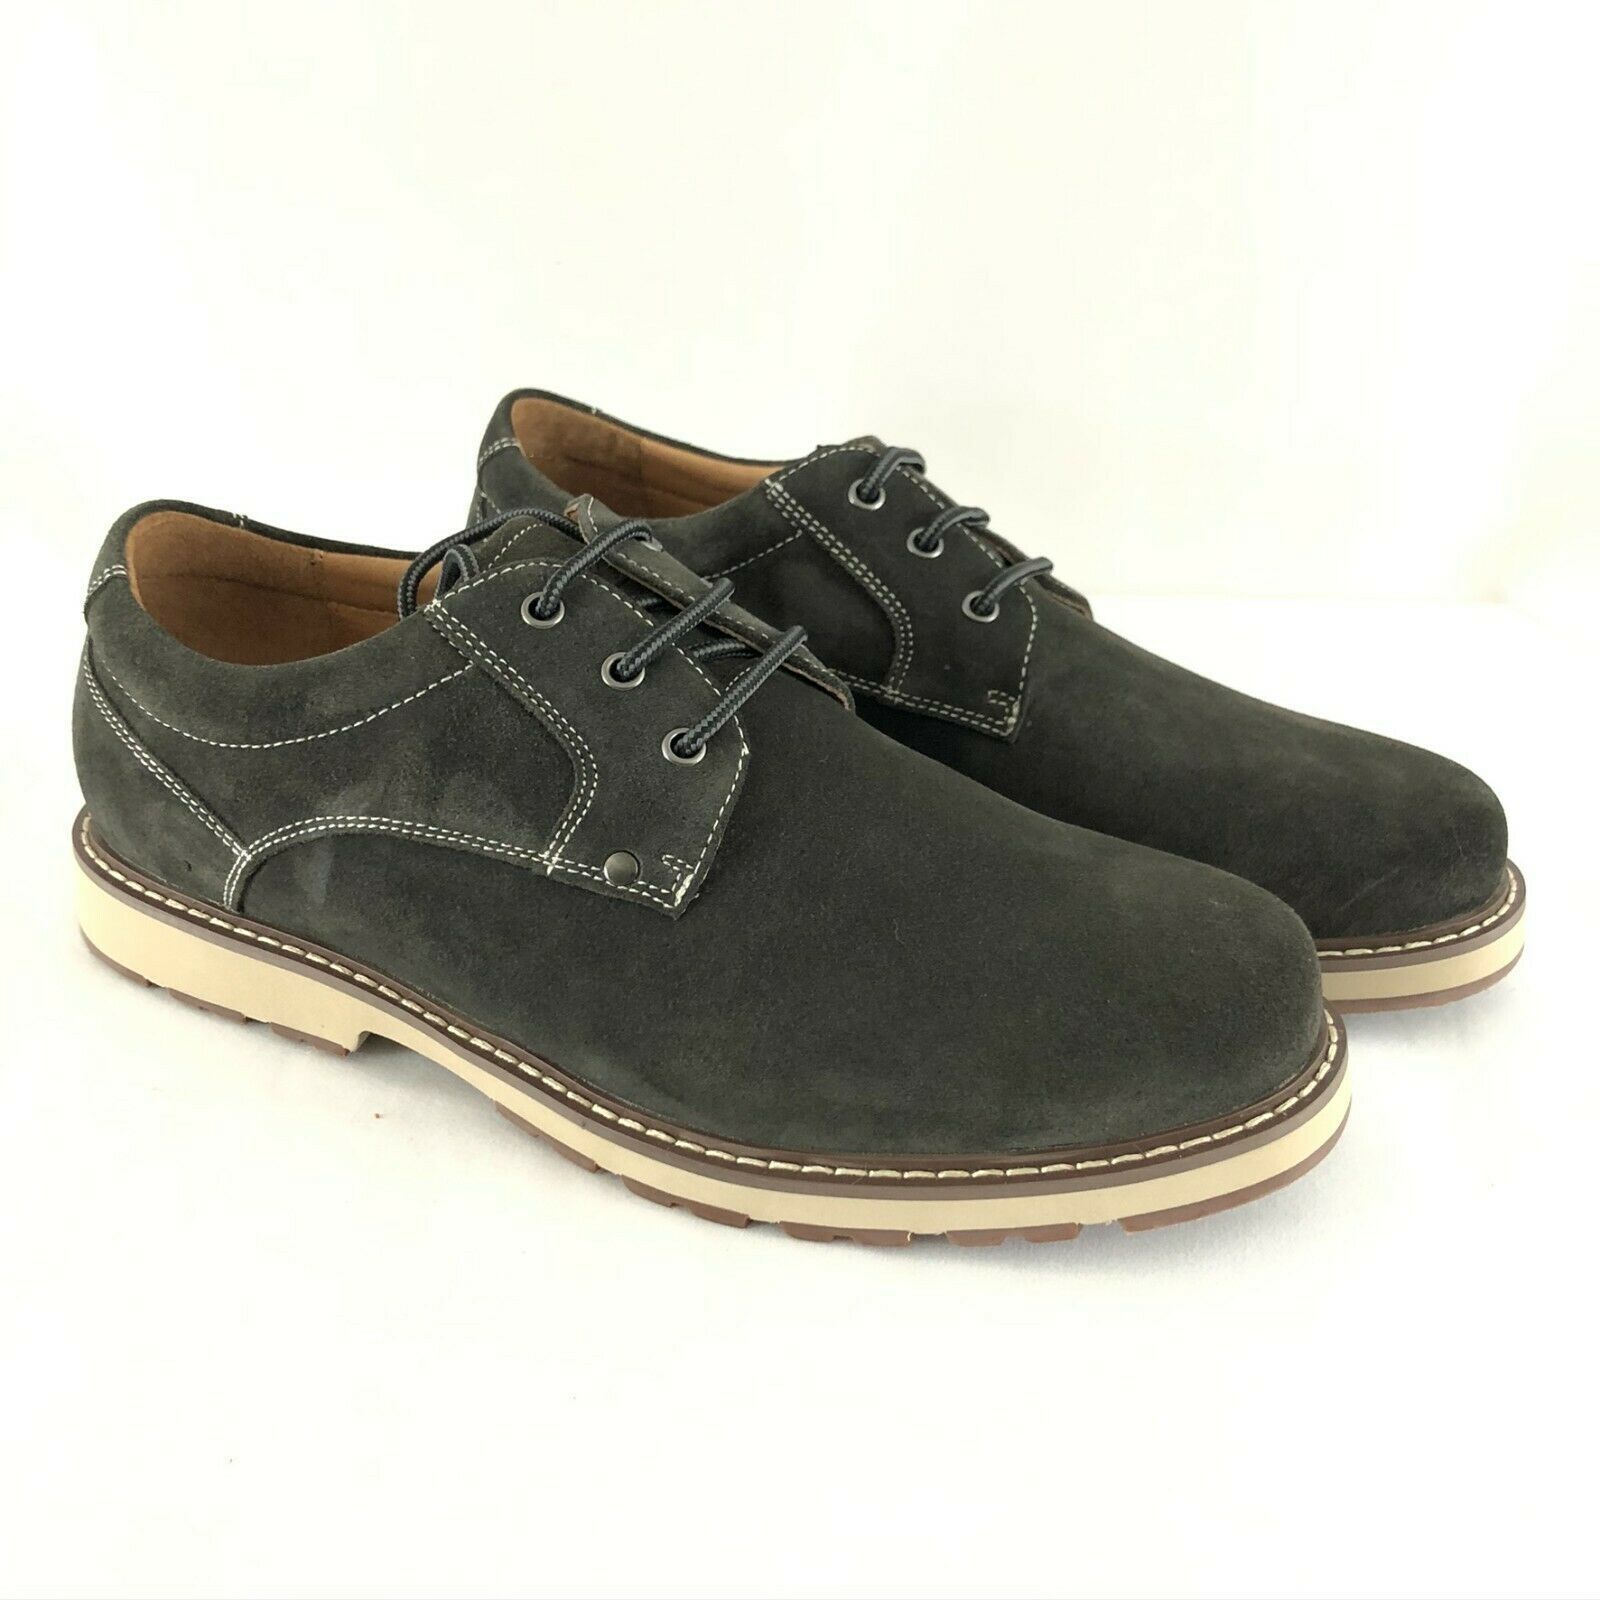 Primary image for Camel Crown Mens Oxfords Lace Up Leather Suede Casual Black US Size 9